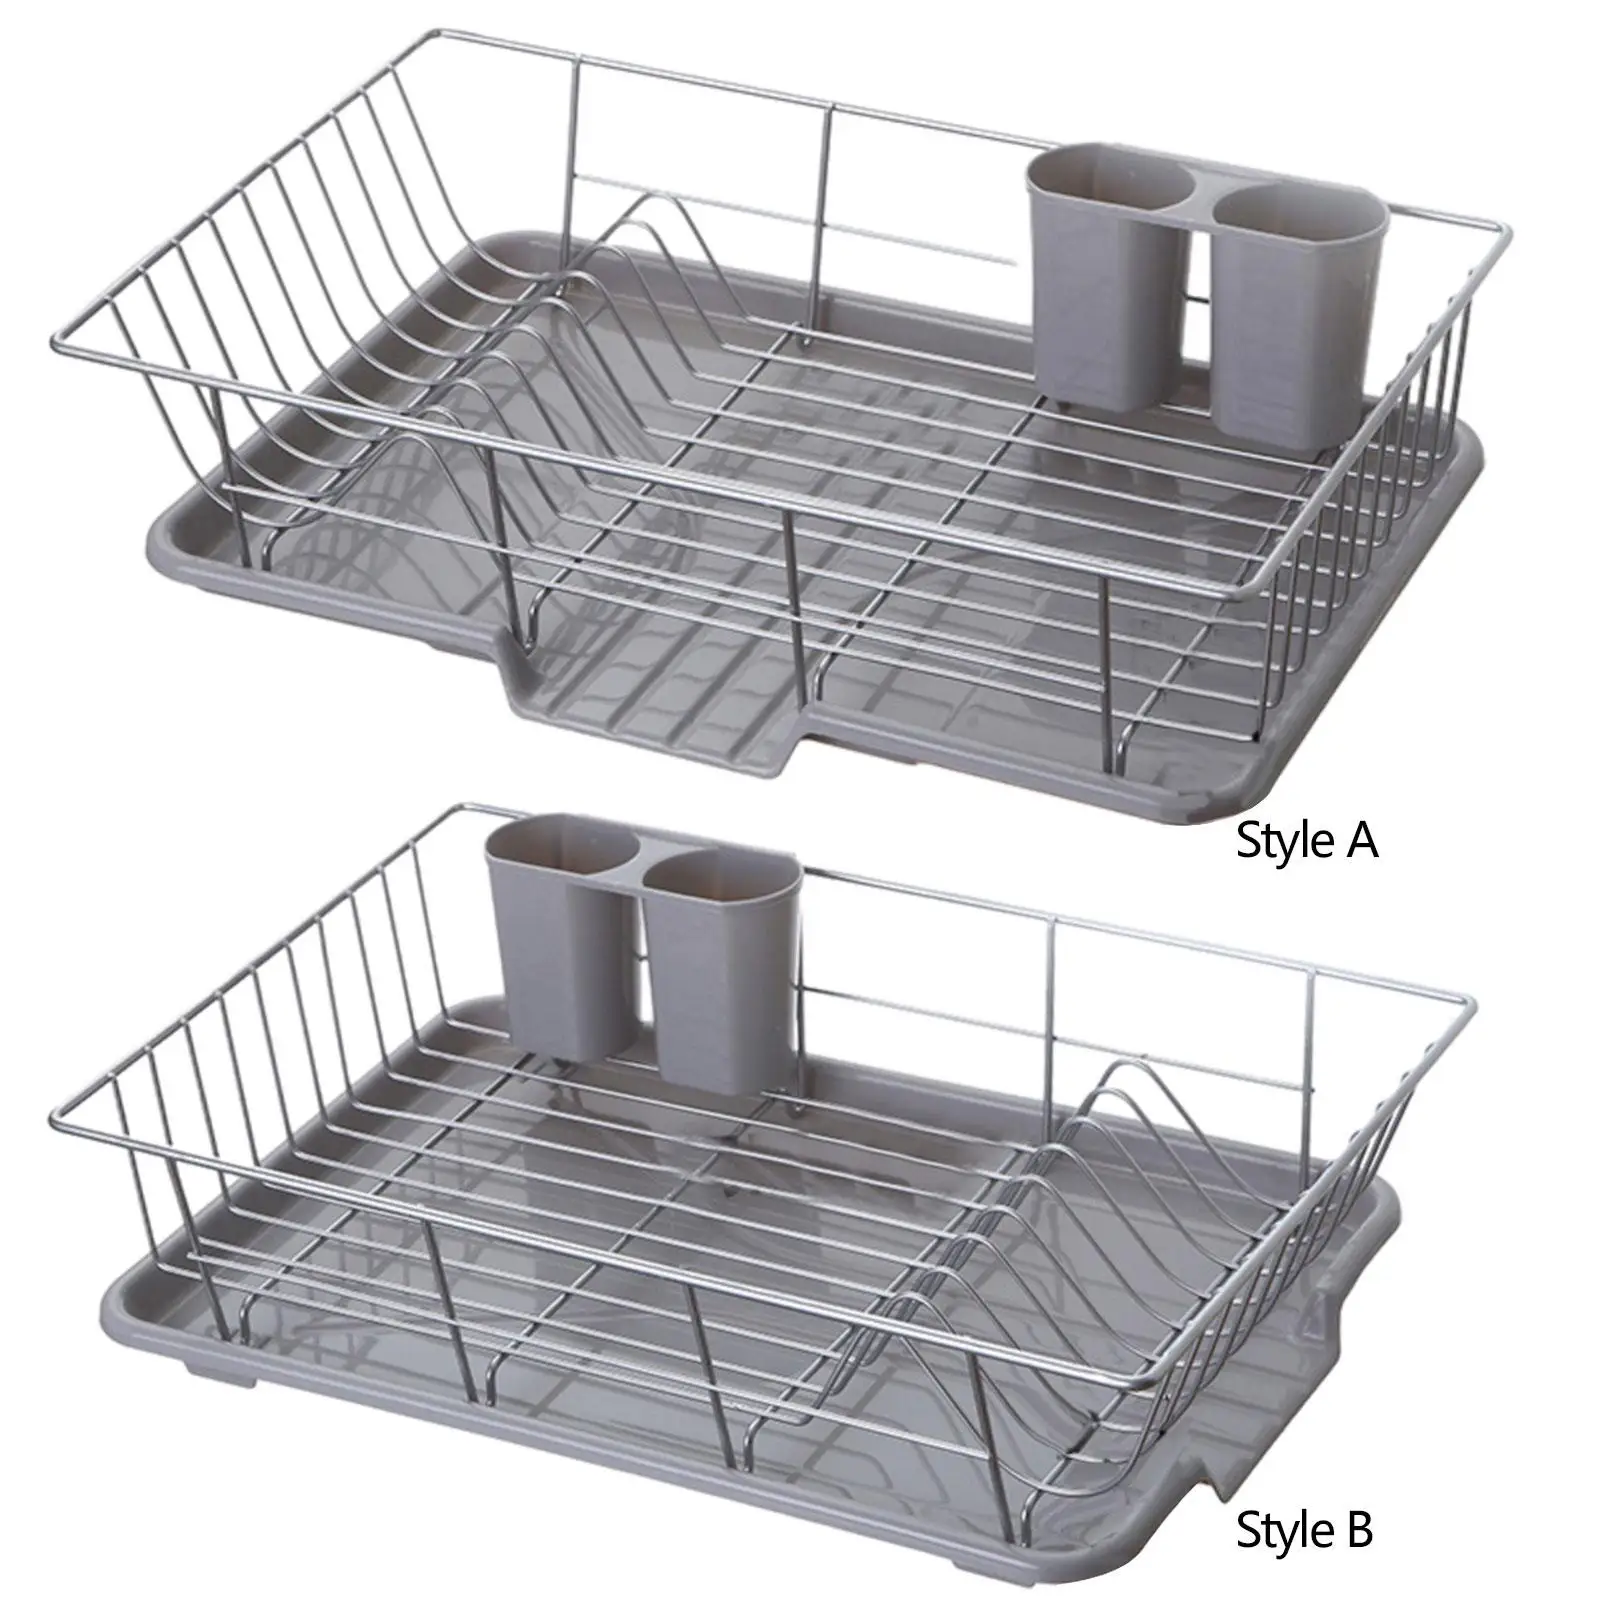 Dish Drainer Portable Utensil Holder with Drainboard Kitchen Drying Rack Dish Racks for Countertop Plates Kitchen Forks Bathroom